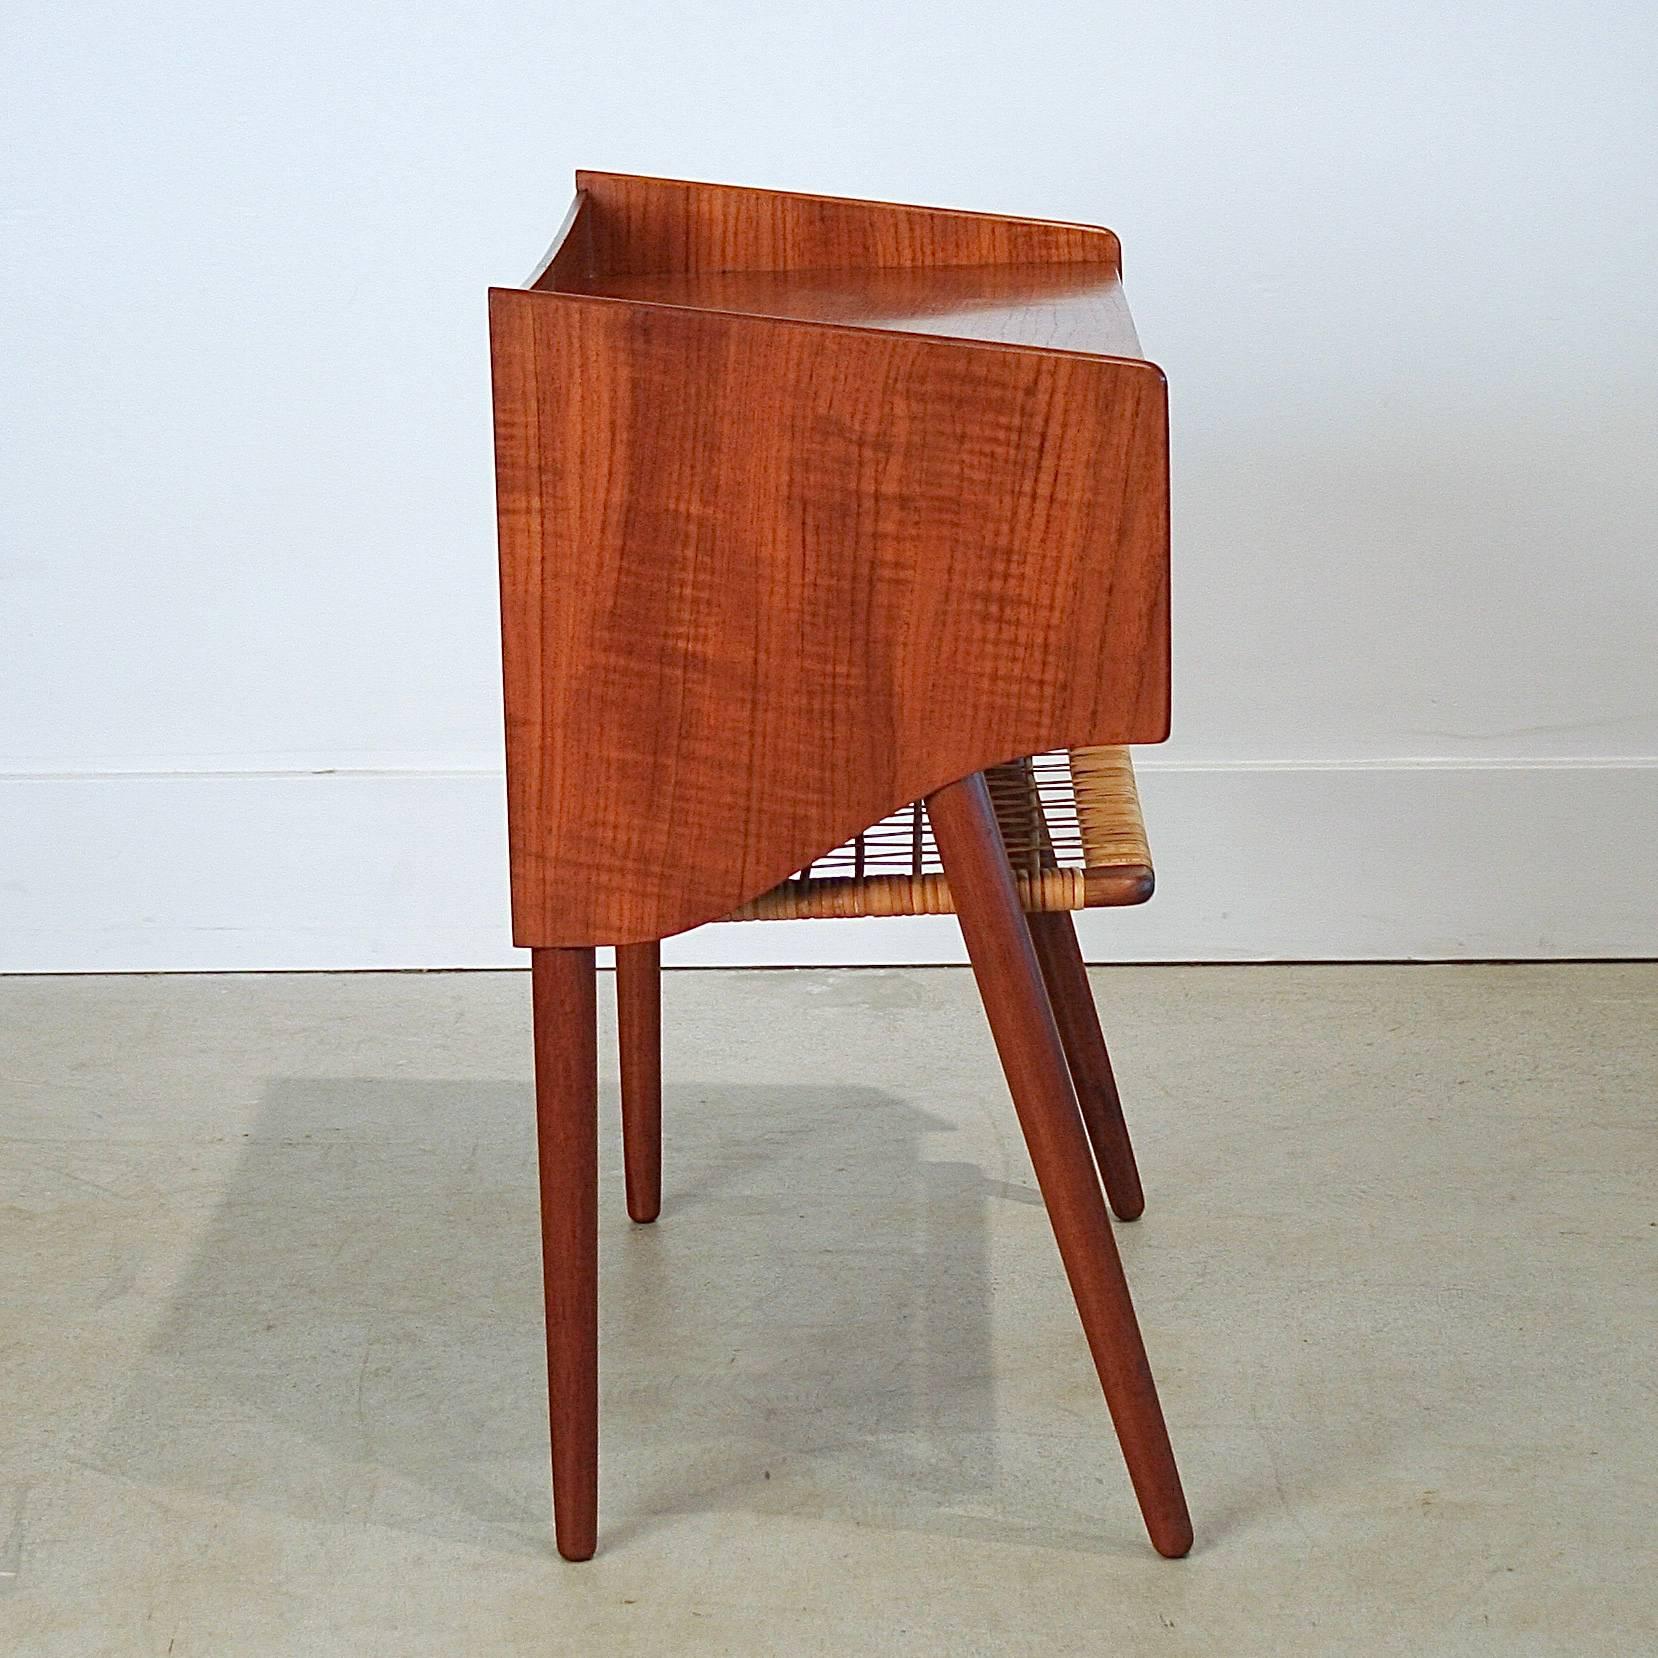 Vintage Danish Teak and Cane Side Table In Excellent Condition For Sale In Vancouver, BC